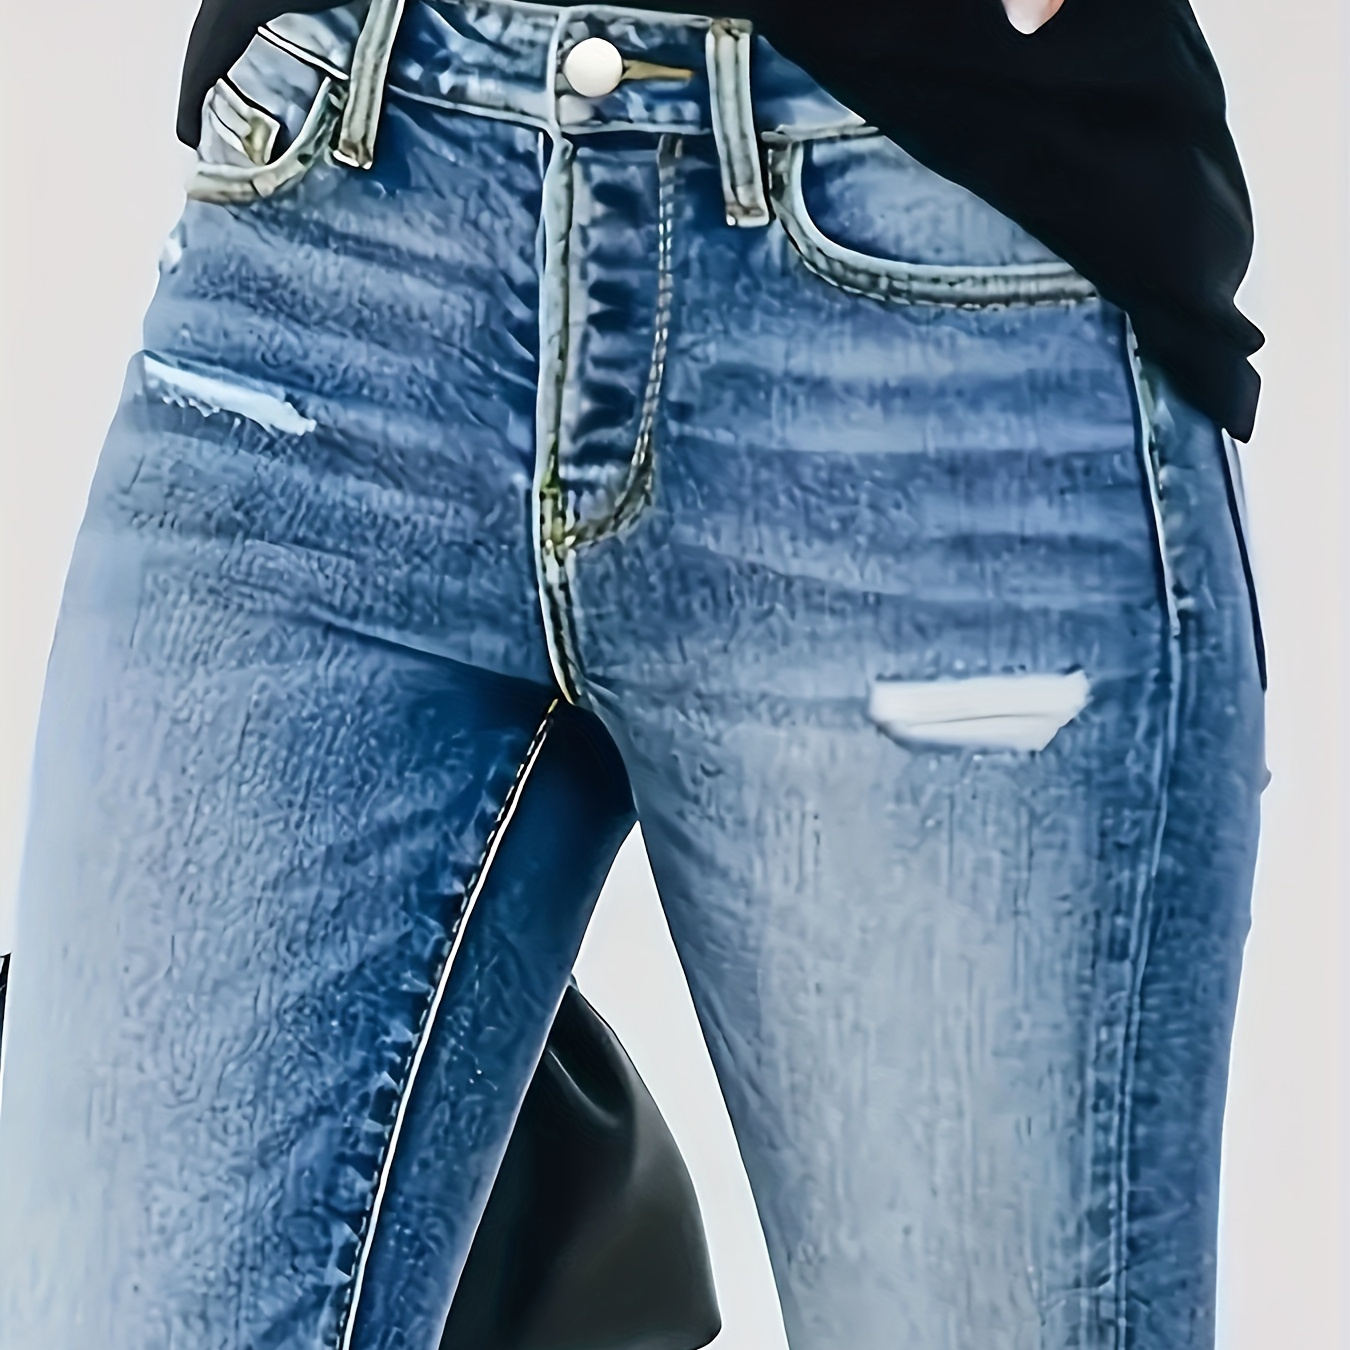 

Plain Ripped Classic Skinny Fit Denim Jeans For Women, High Waist, Stretchable, Casual Style, Blue Distressed Denim